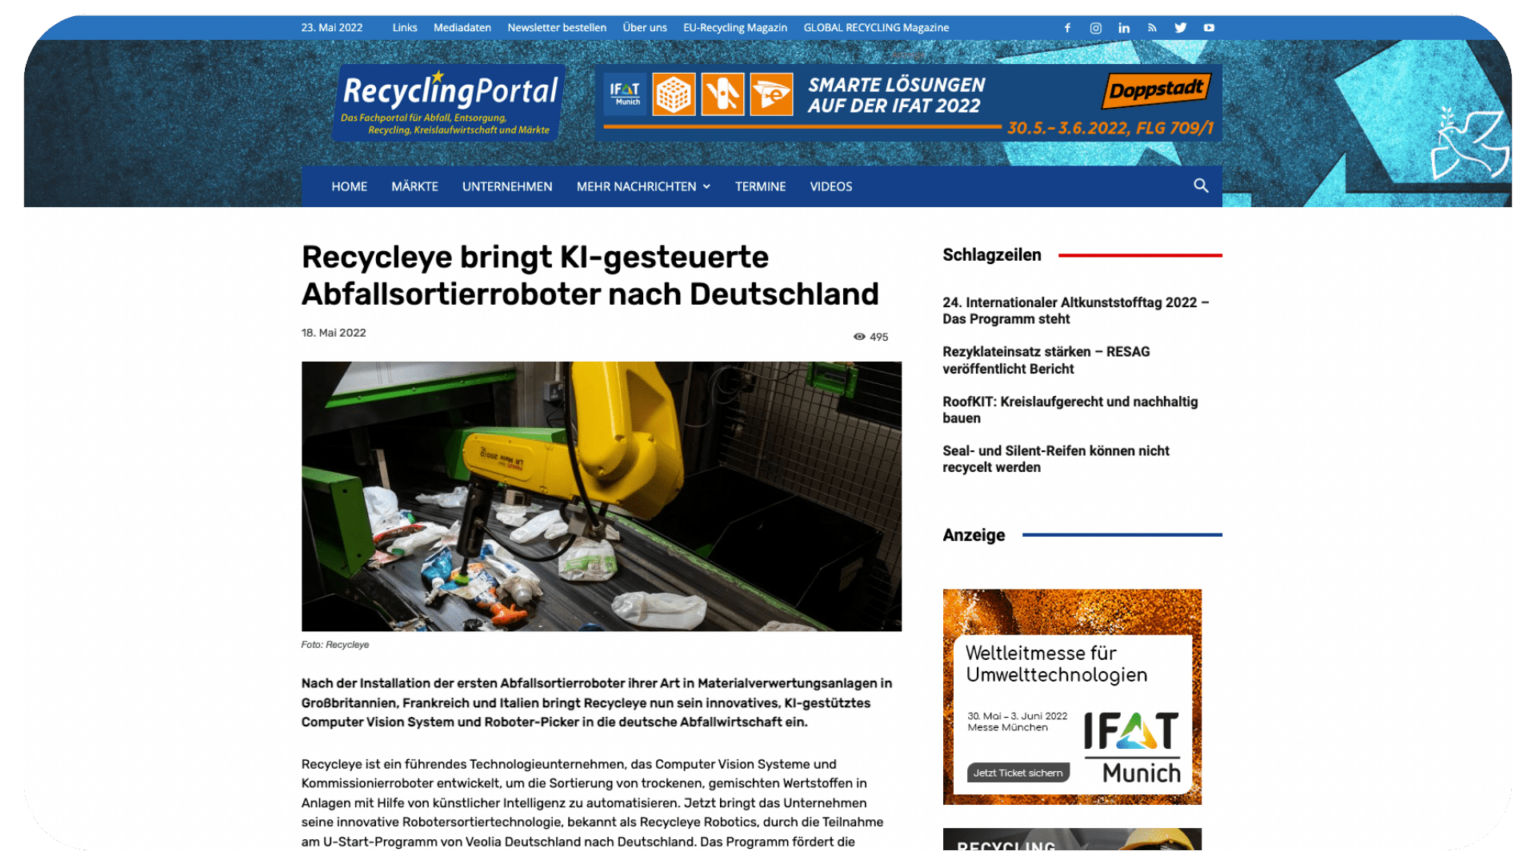 recycling portal article on Recycleye